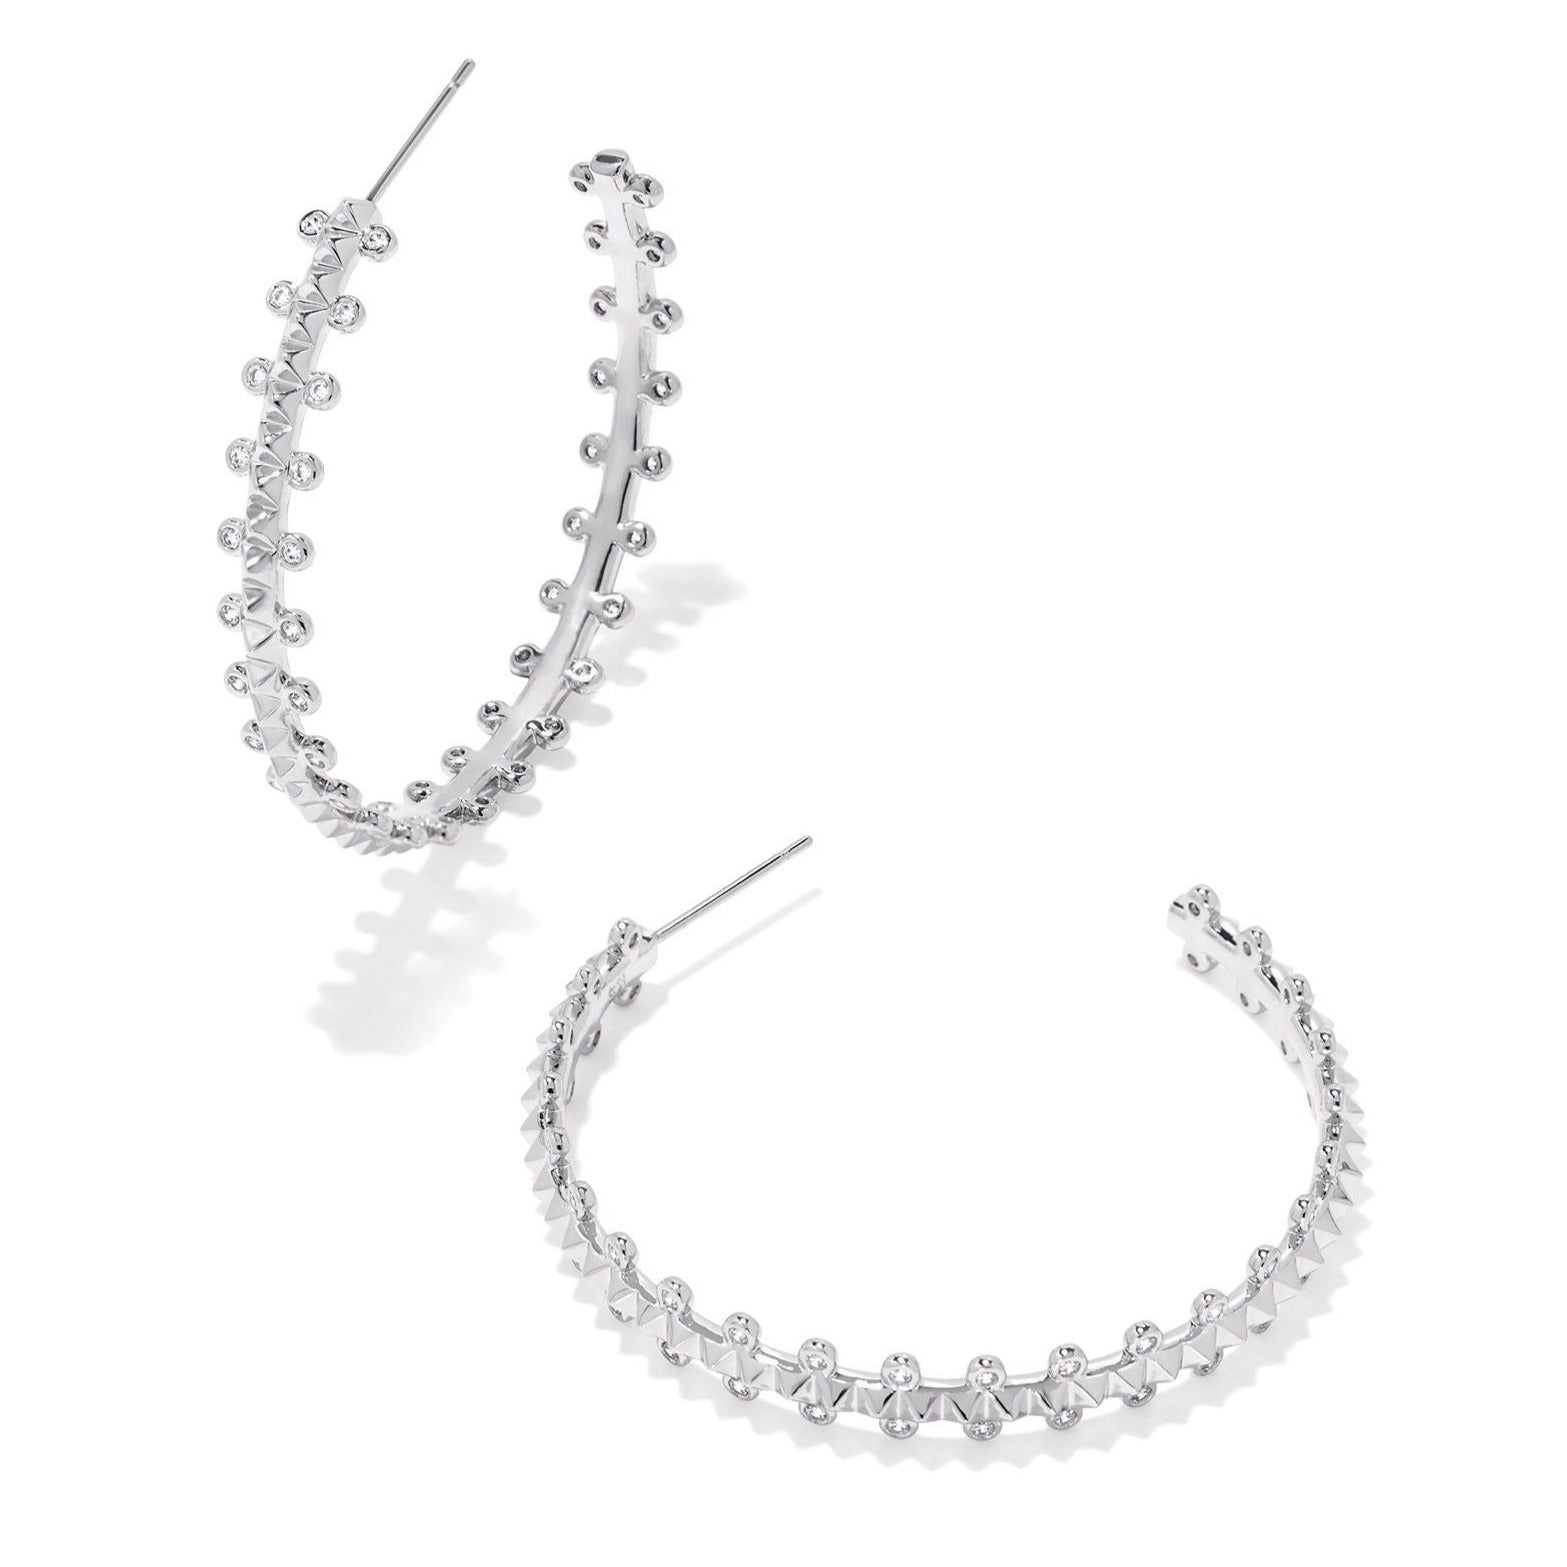 Kendra Scott | Jada Silver Hoop Earrings in White Crystal - Giddy Up Glamour Boutique